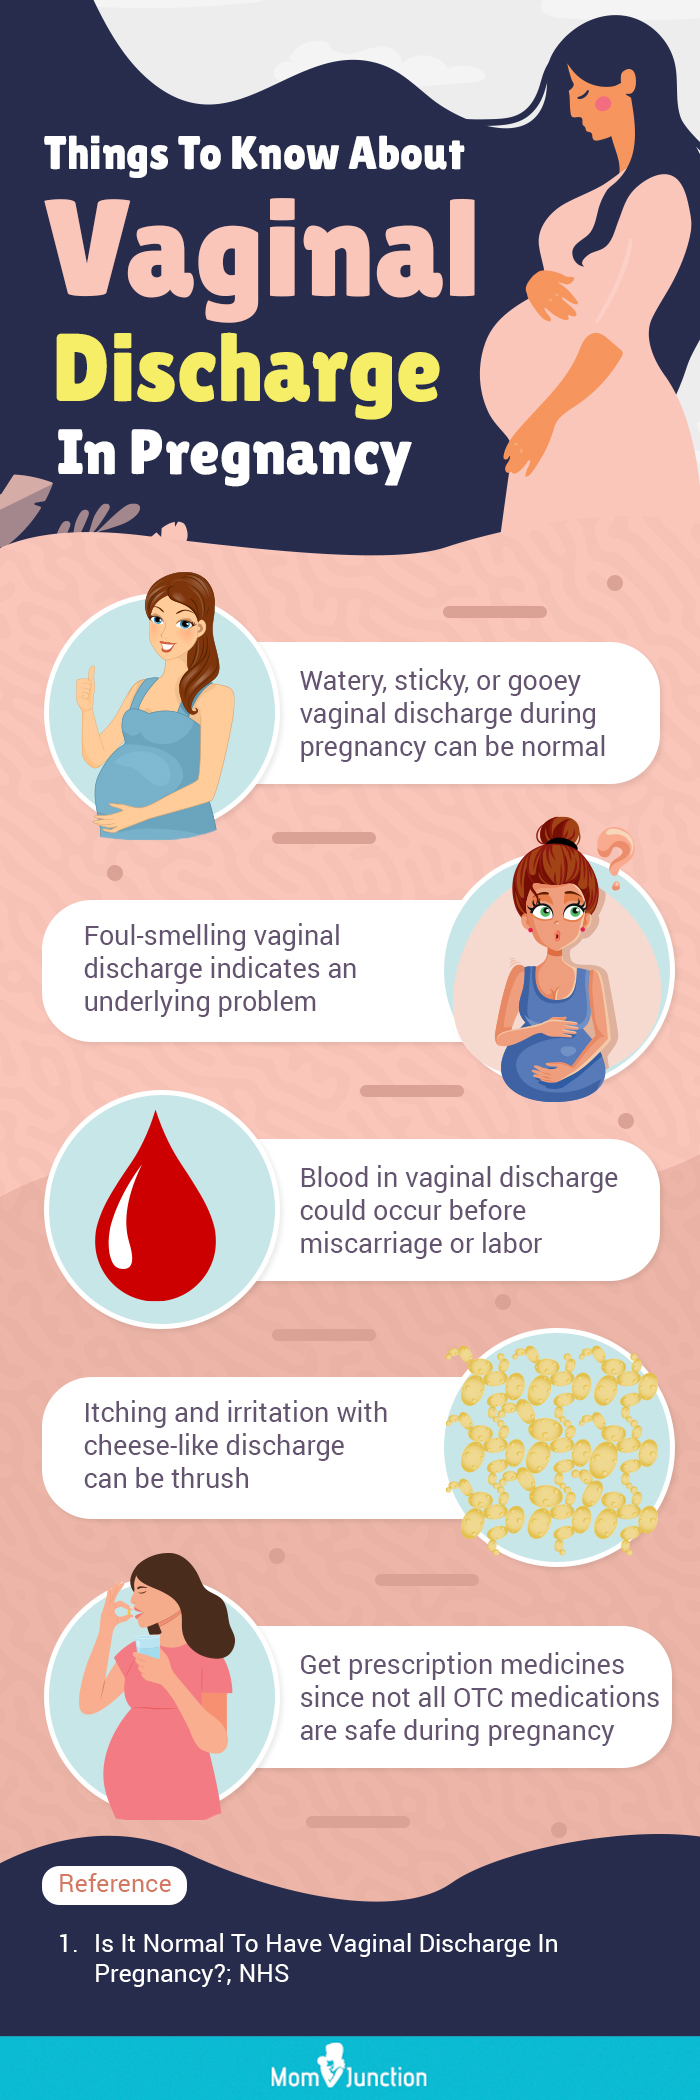 things to know about vaginal discharge in pregnancy (infographic)